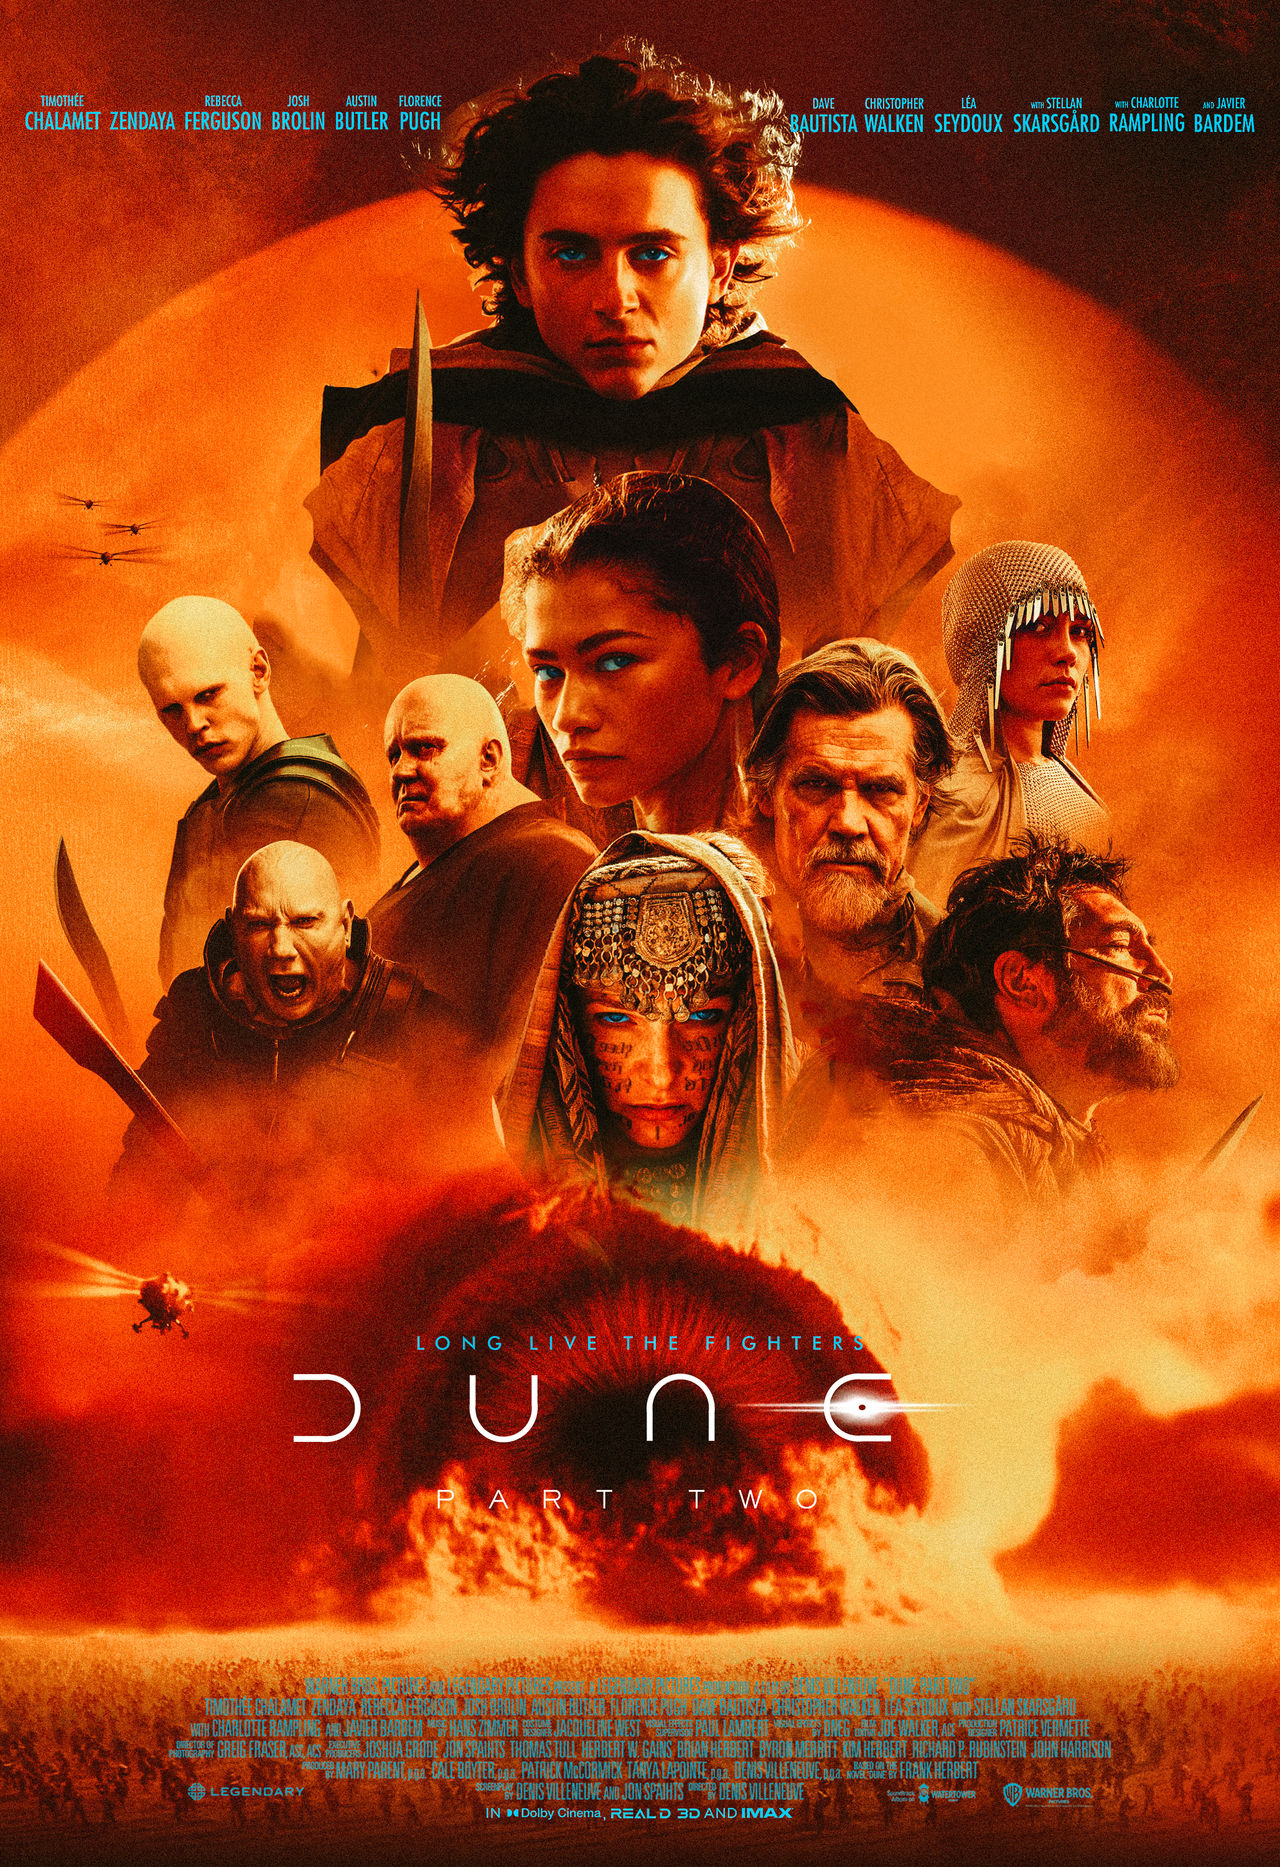 dune_part_2_poster_fixed_by_andrewvm_dgrxbla-fullview.jpg